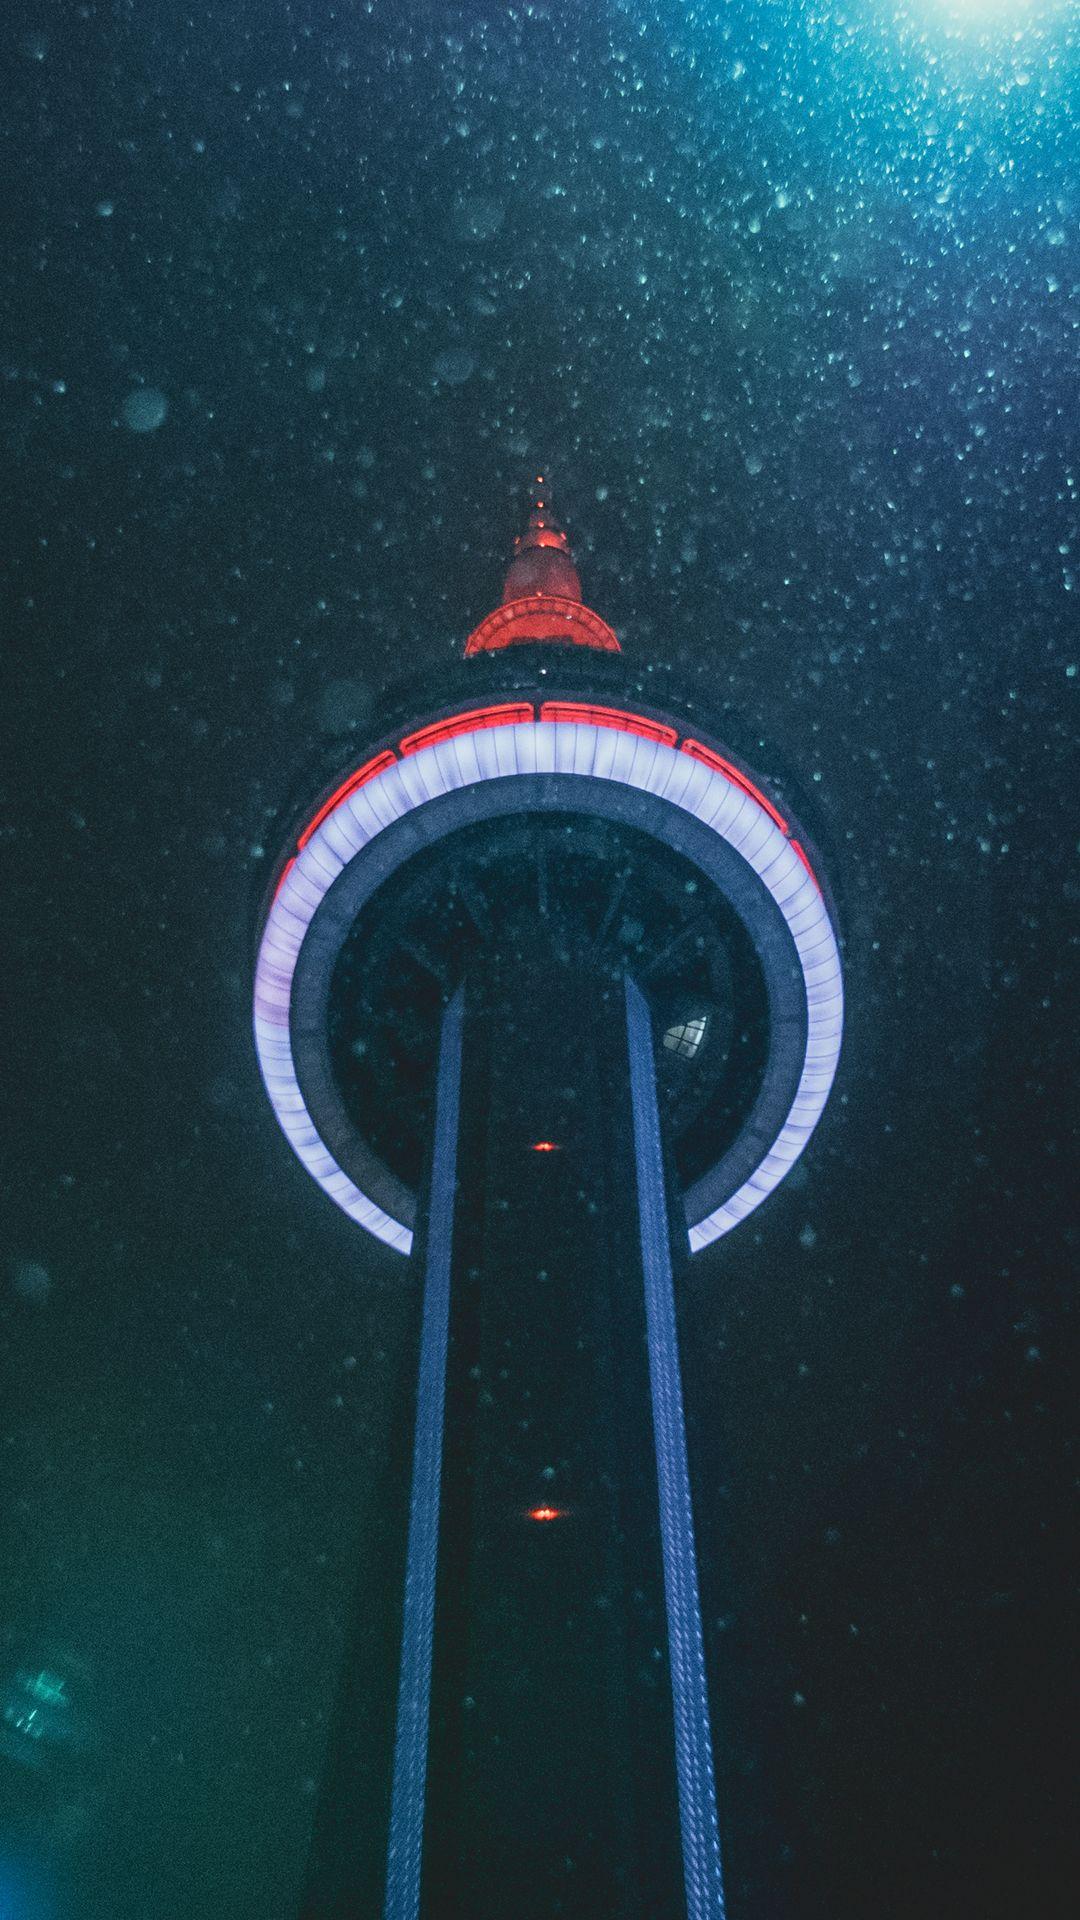 Collection of my Toronto photo as Phone wallpaper